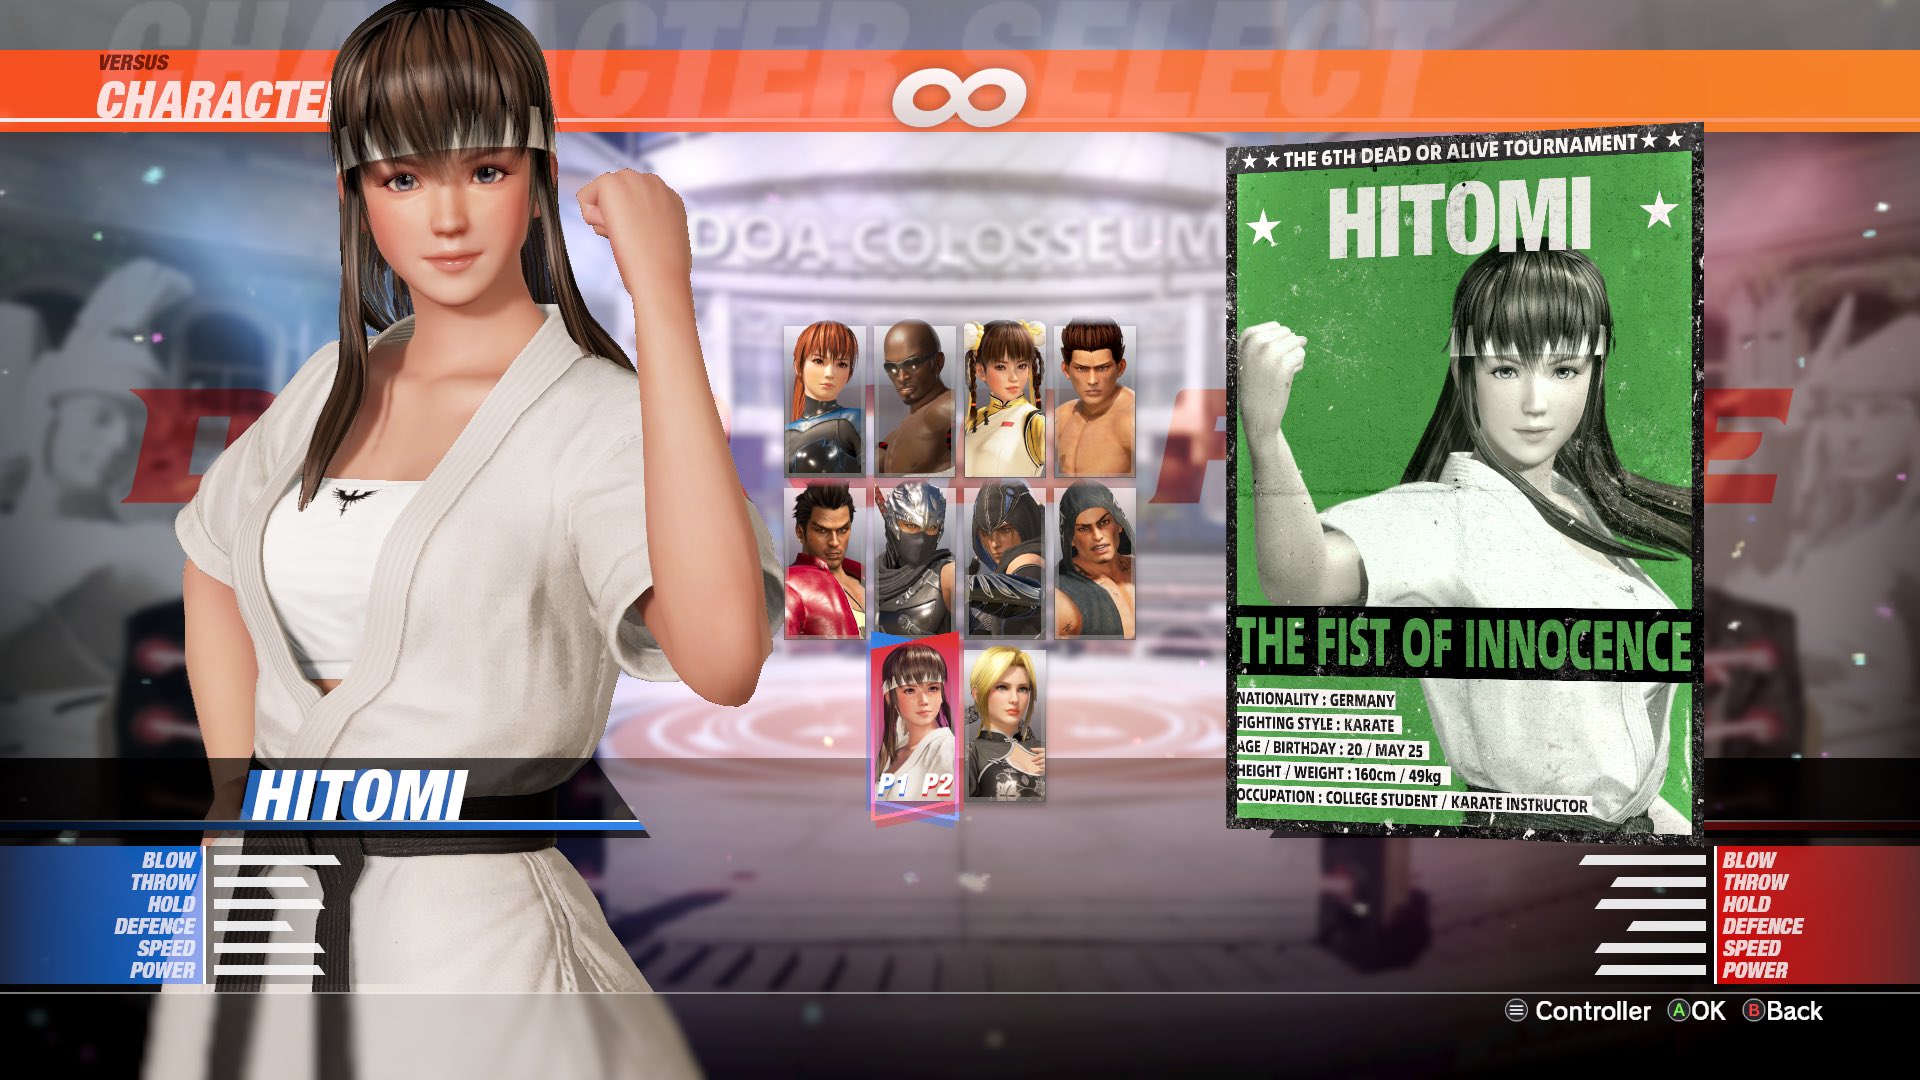 Doatecdoa6official On Twitter Here Are The 3 Current Outfit Options And Info Car For Hitomi 